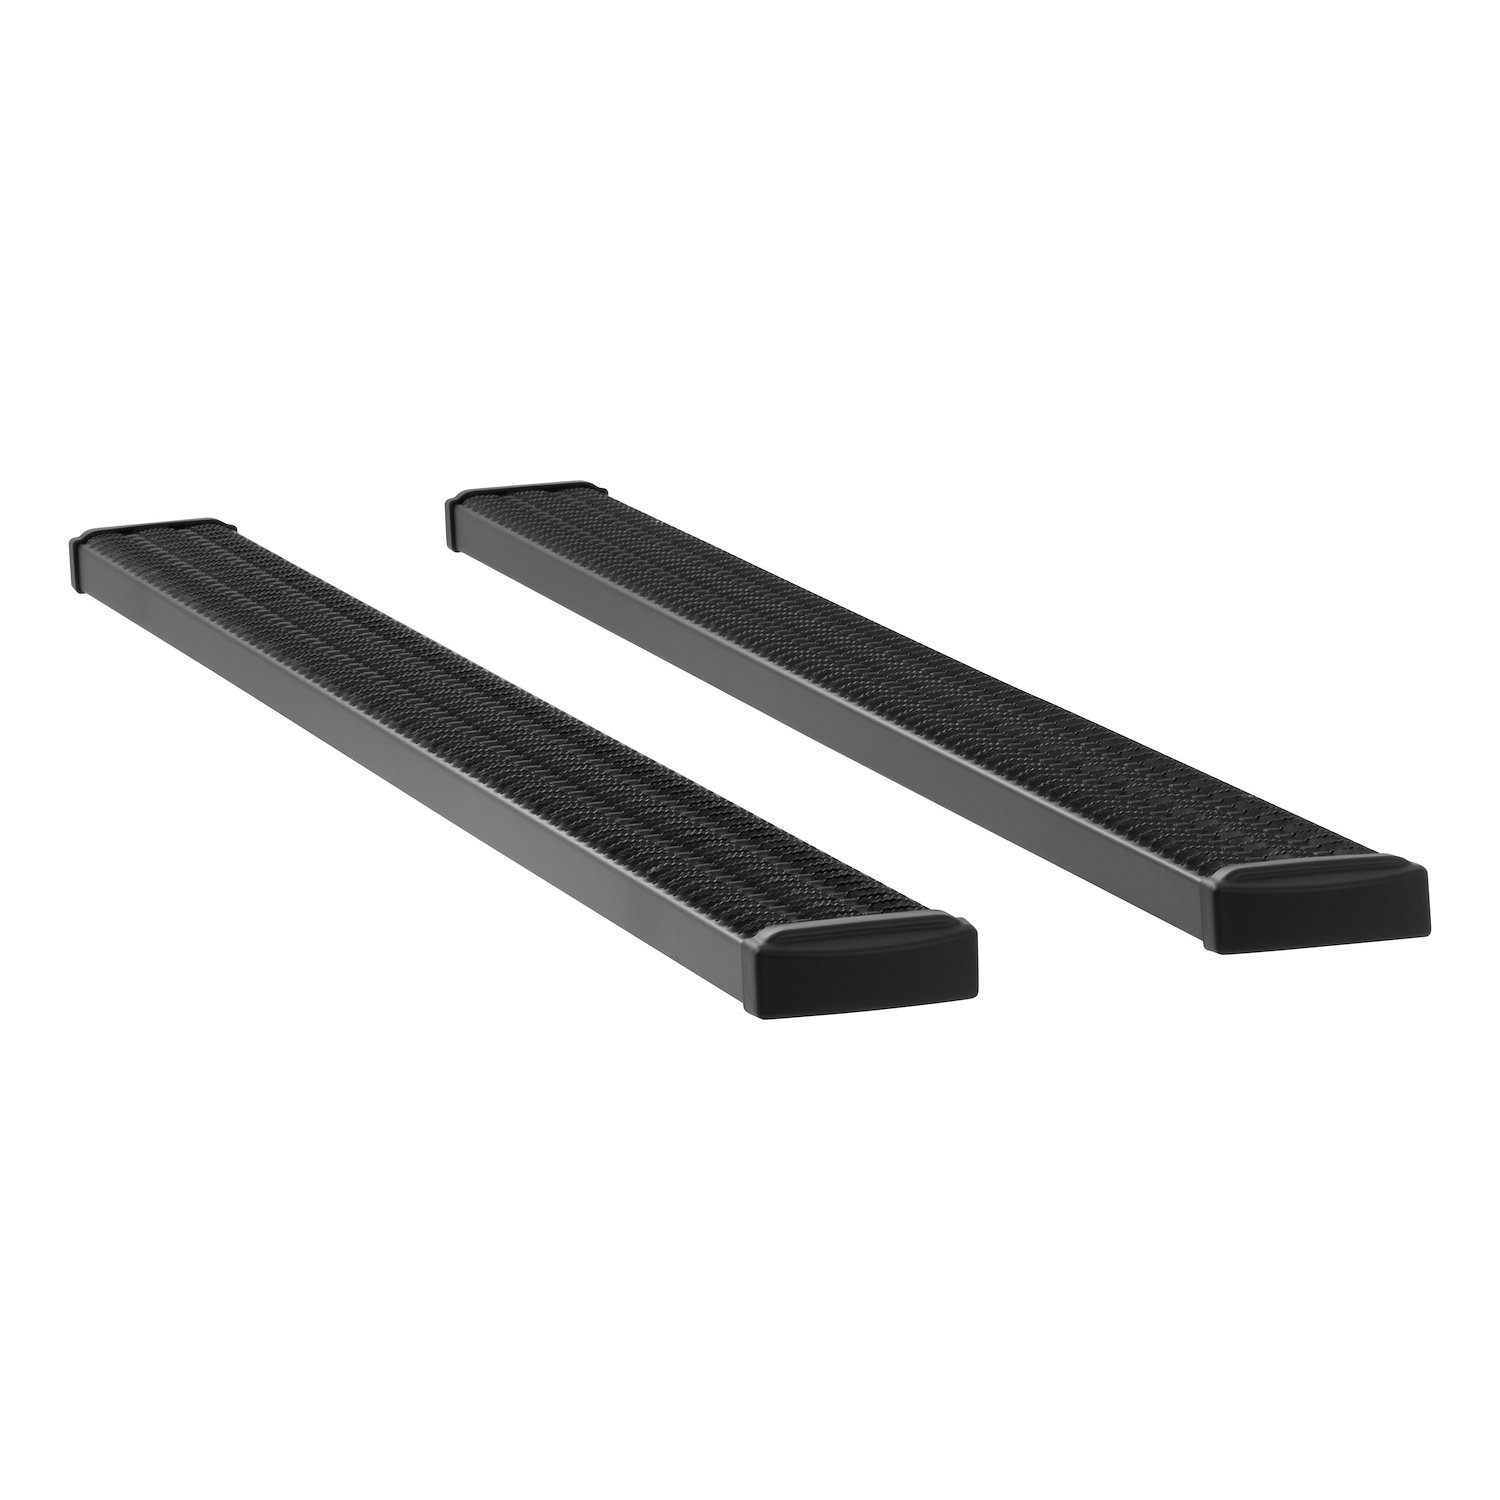 415098-401439 Grip Step 7 in. x 98 in. Aluminum Wheel-to-Wheel Running Boards Fits Select Ram 2500